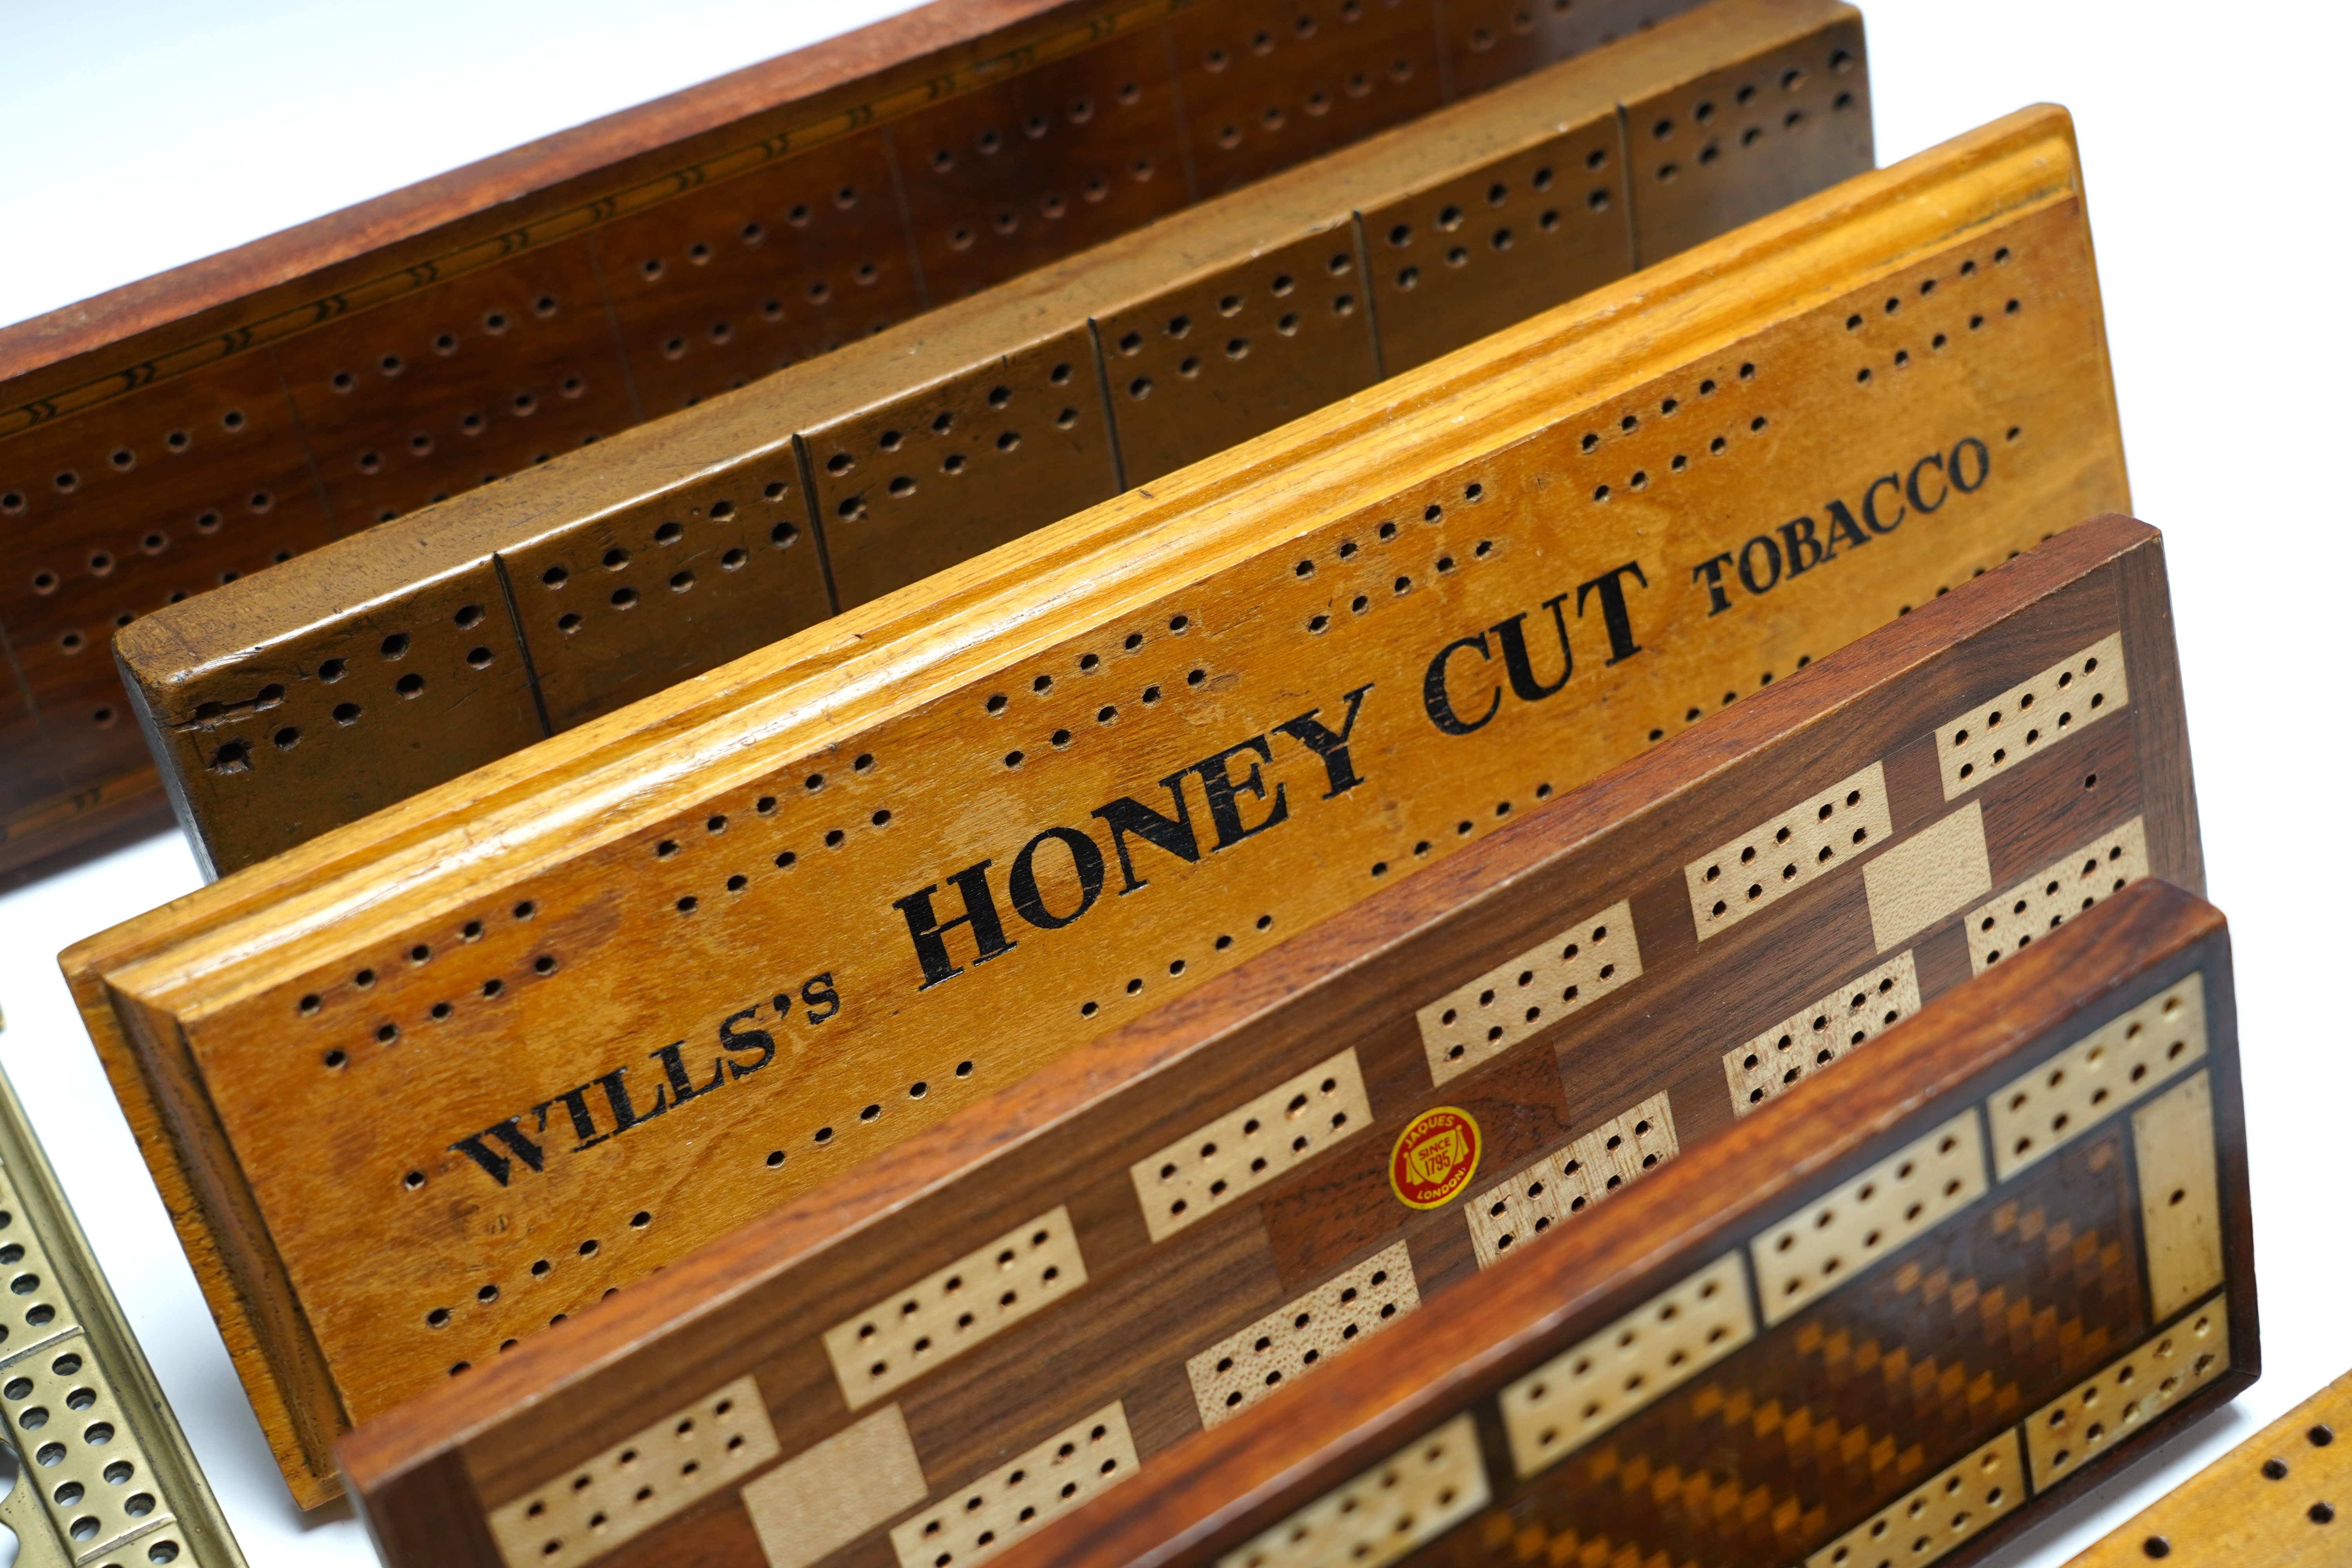 Nine cribbage boards including a horn example, 'Wills Tobacco' advertising and bone and marquetry examples, largest 42cm in length